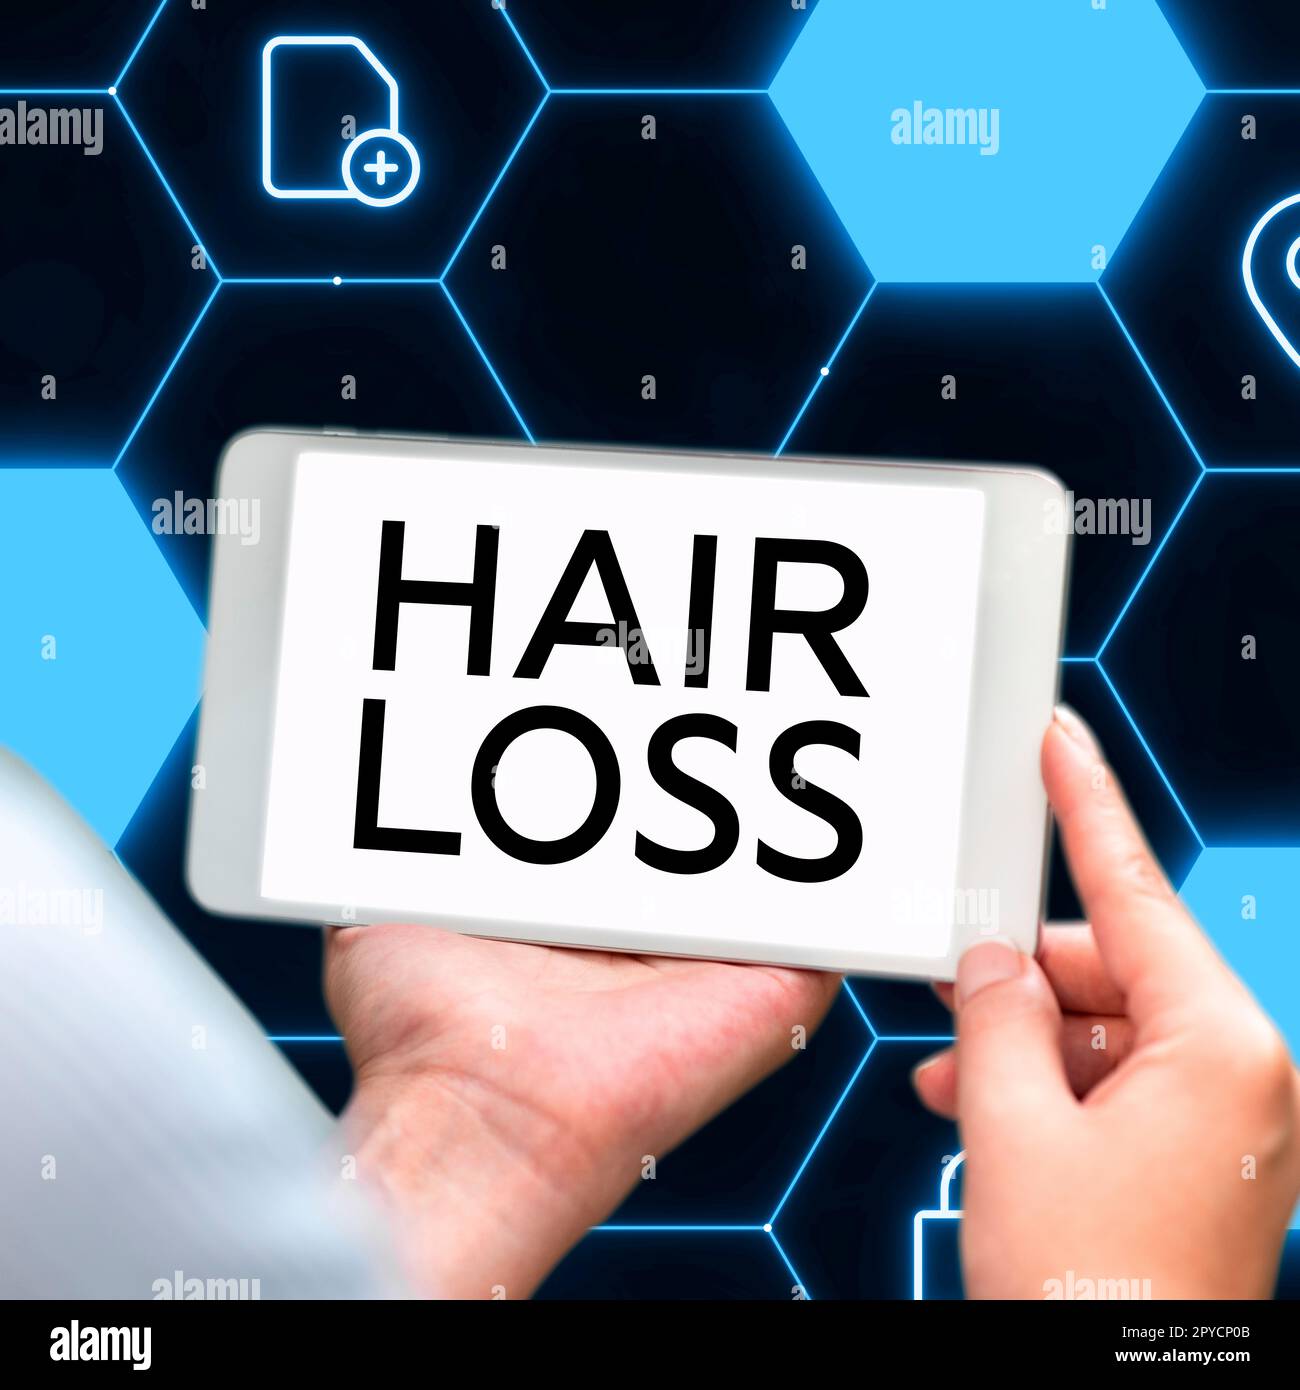 Text showing inspiration Hair Loss. Internet Concept Loss of human hair from the head or any part of the body Balding Stock Photo